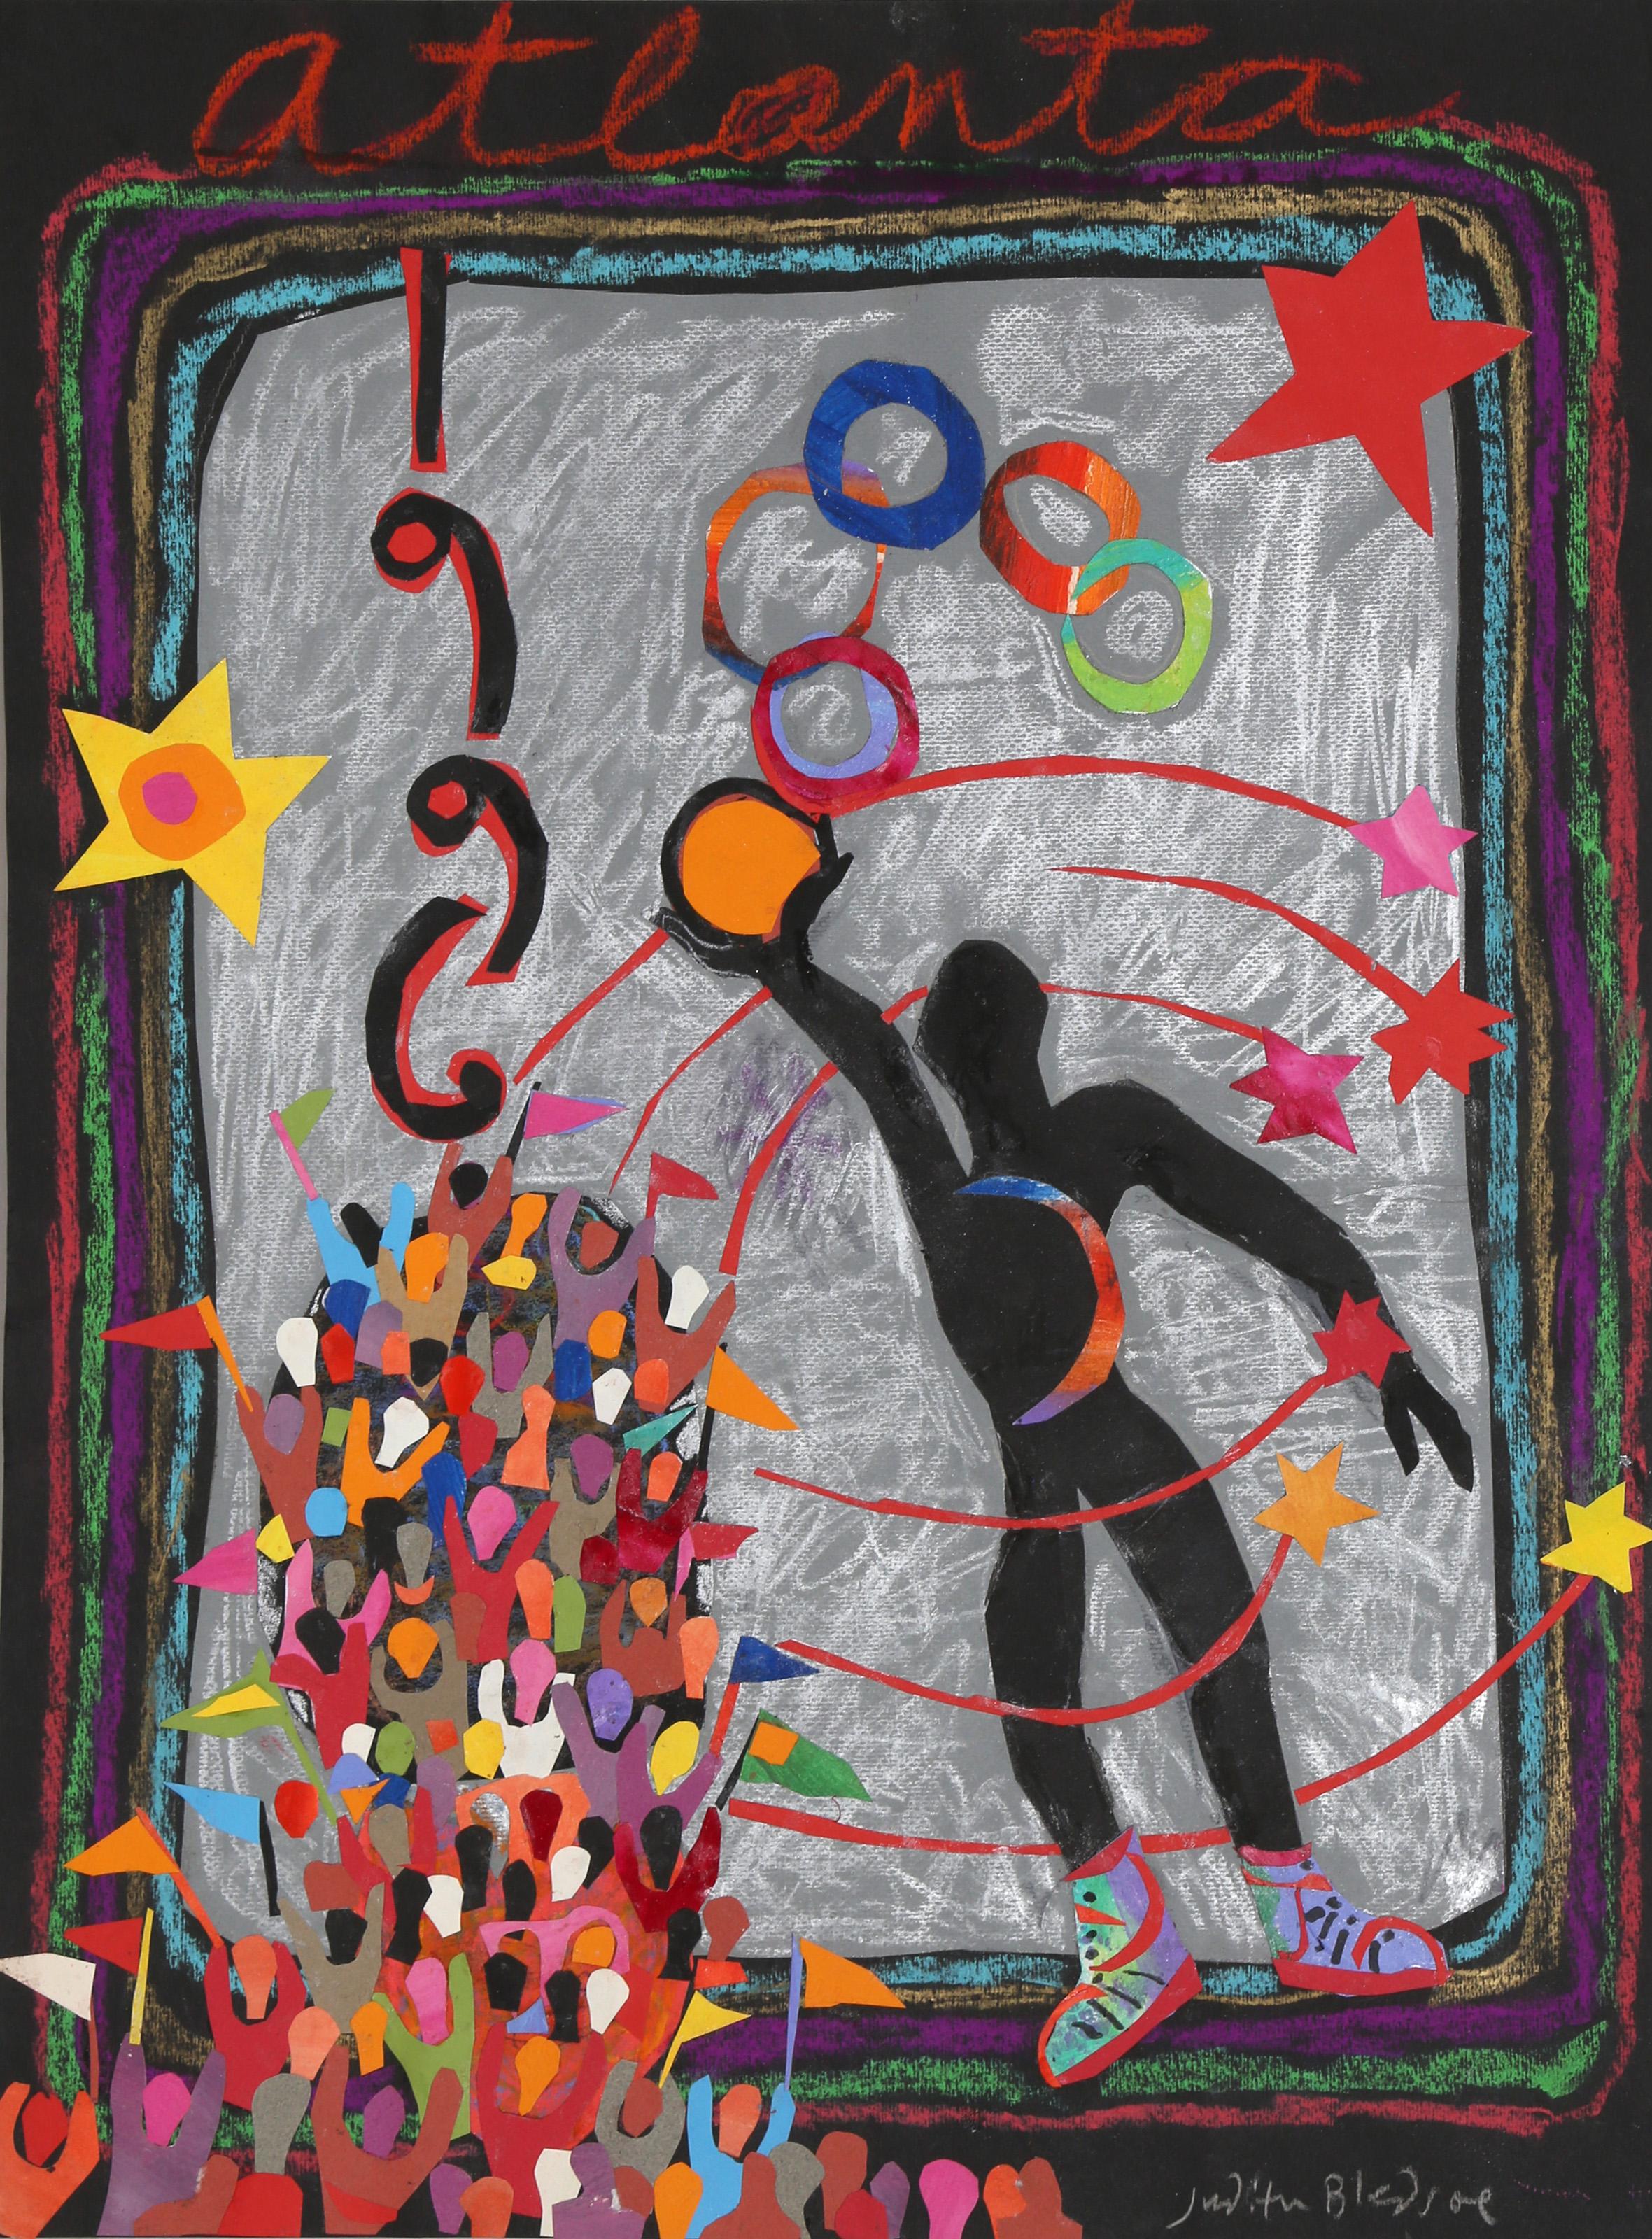 Atlanta Olympics - Athlete with Ball, Pastel and Collage on Paper